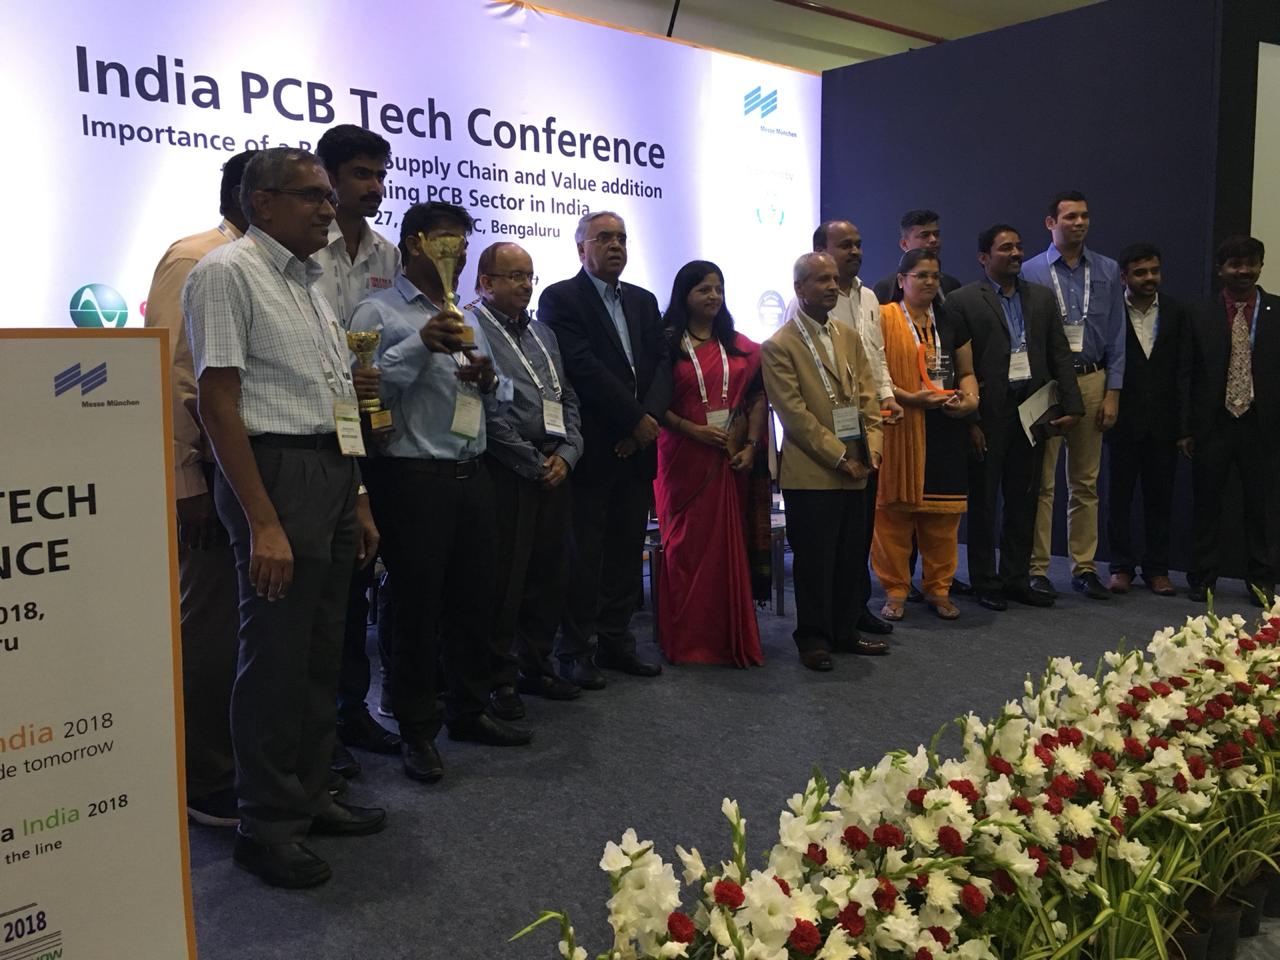 Tessolve Engineer won second place in the IPC India PCB Design contest, held at BIEC, Bangalore on 27th Sep, 2018.